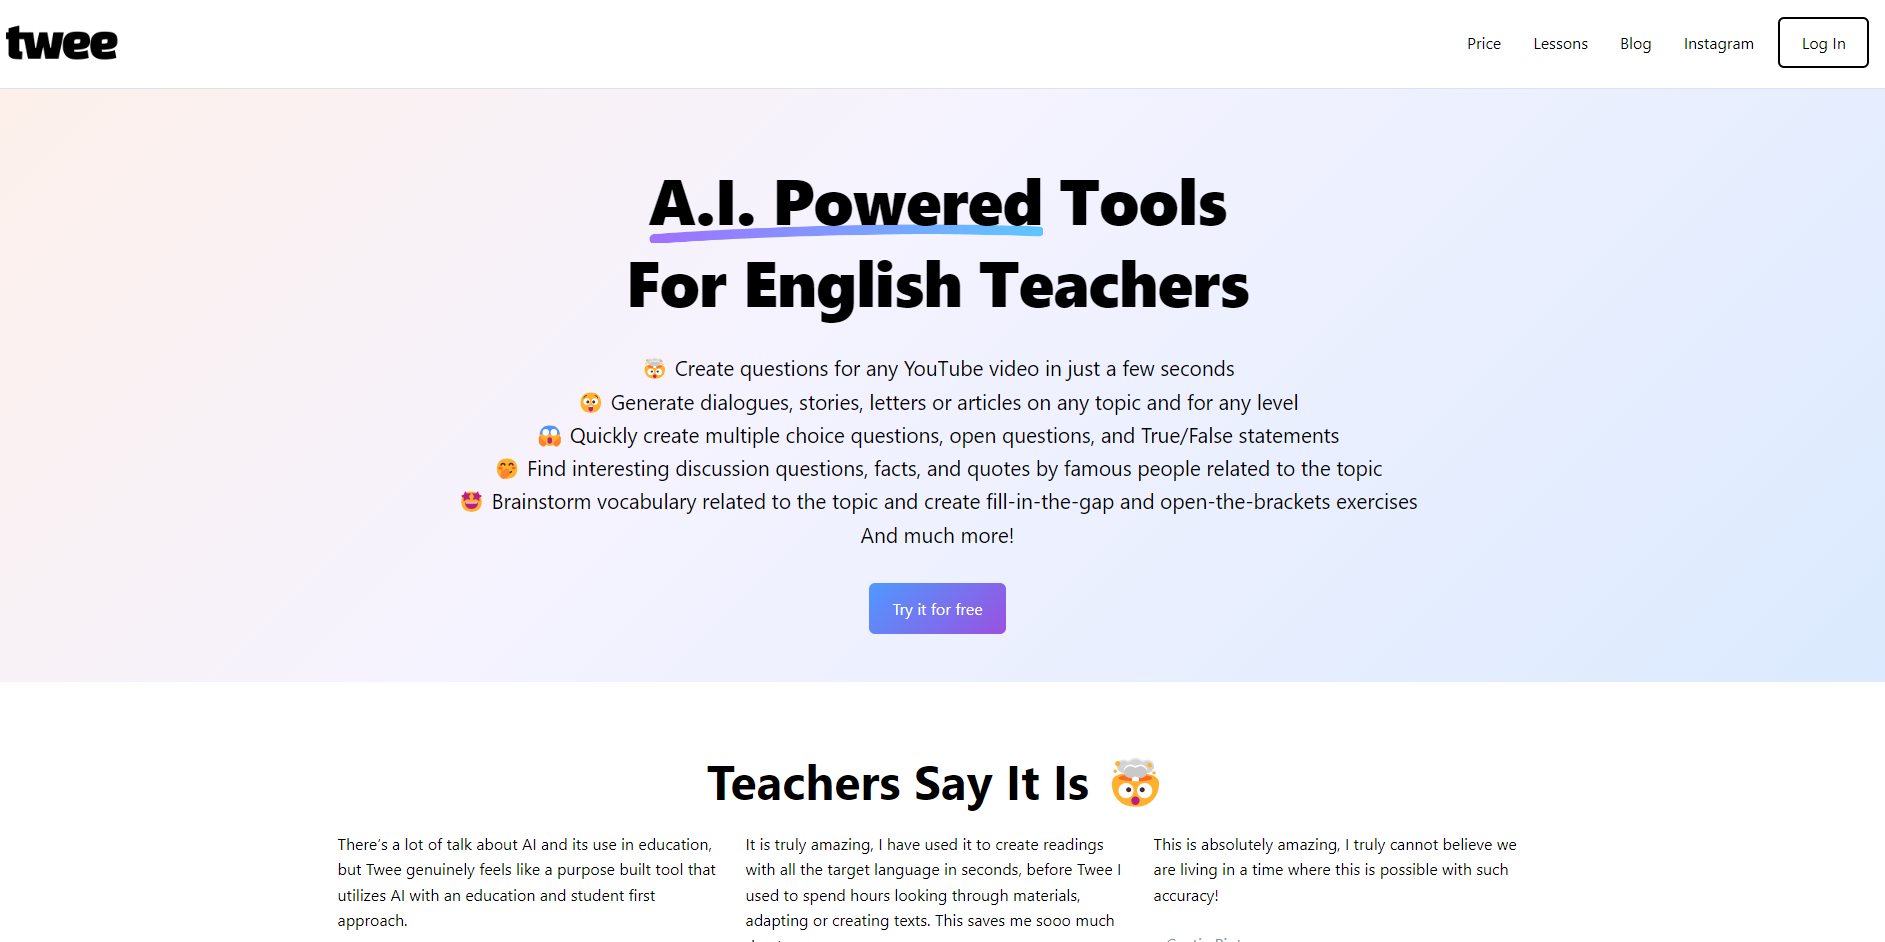 Twee is an AI-powered tool designed to simplify lesson planning for English teachers by generating questions, dialogues, stories, letters, articles, multiple-choice questions, true/false statements, and more